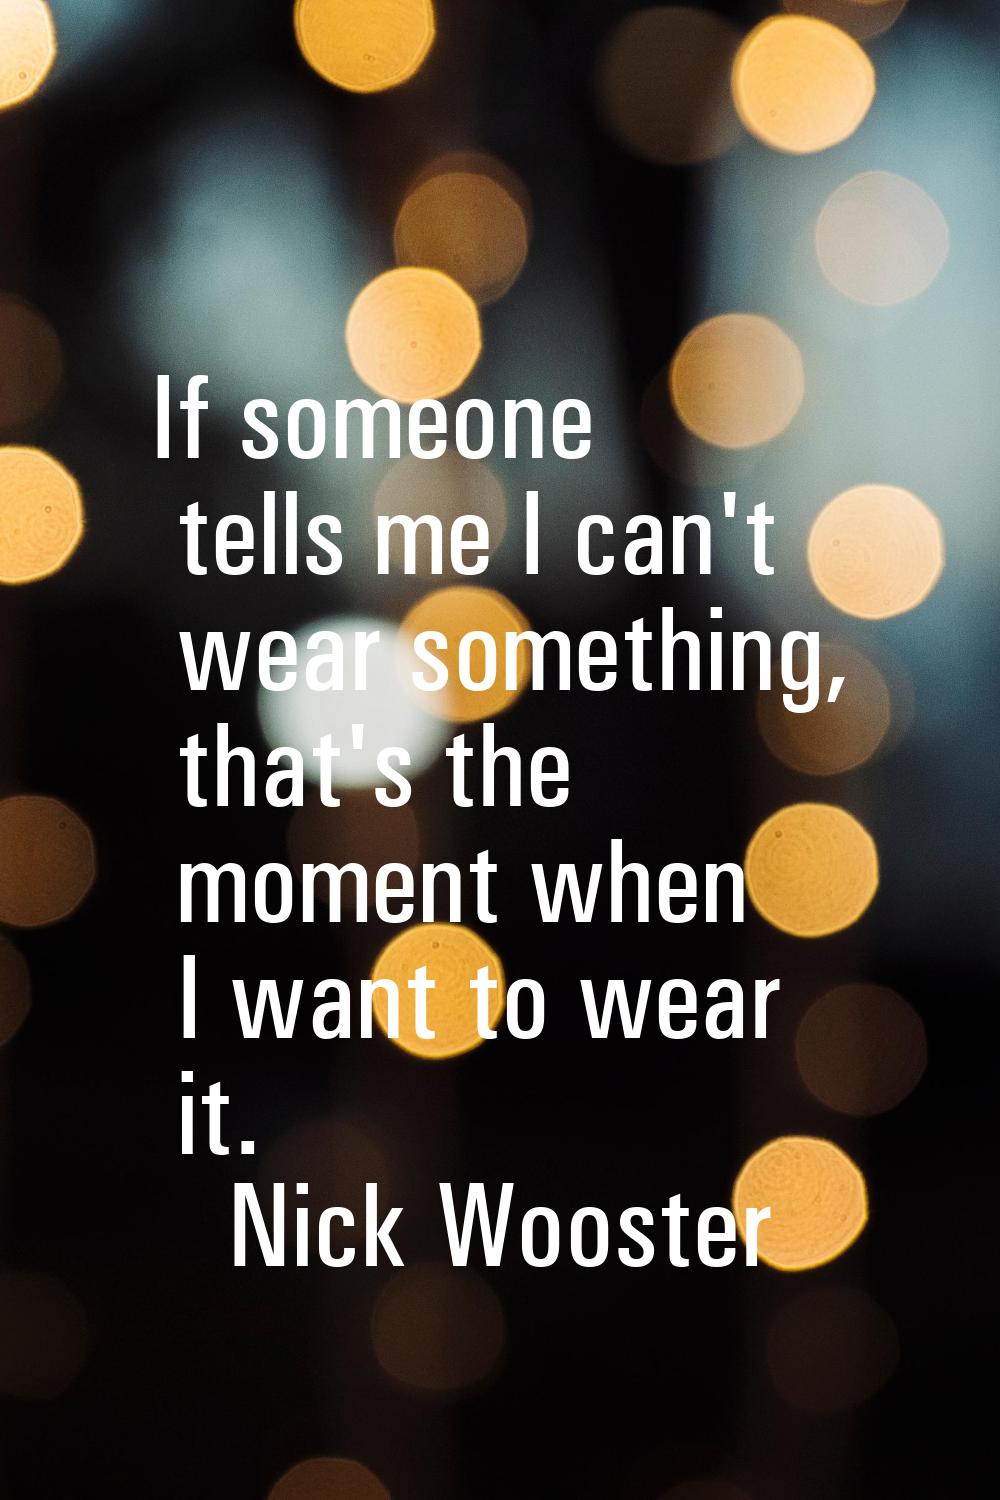 If someone tells me I can't wear something, that's the moment when I want to wear it.